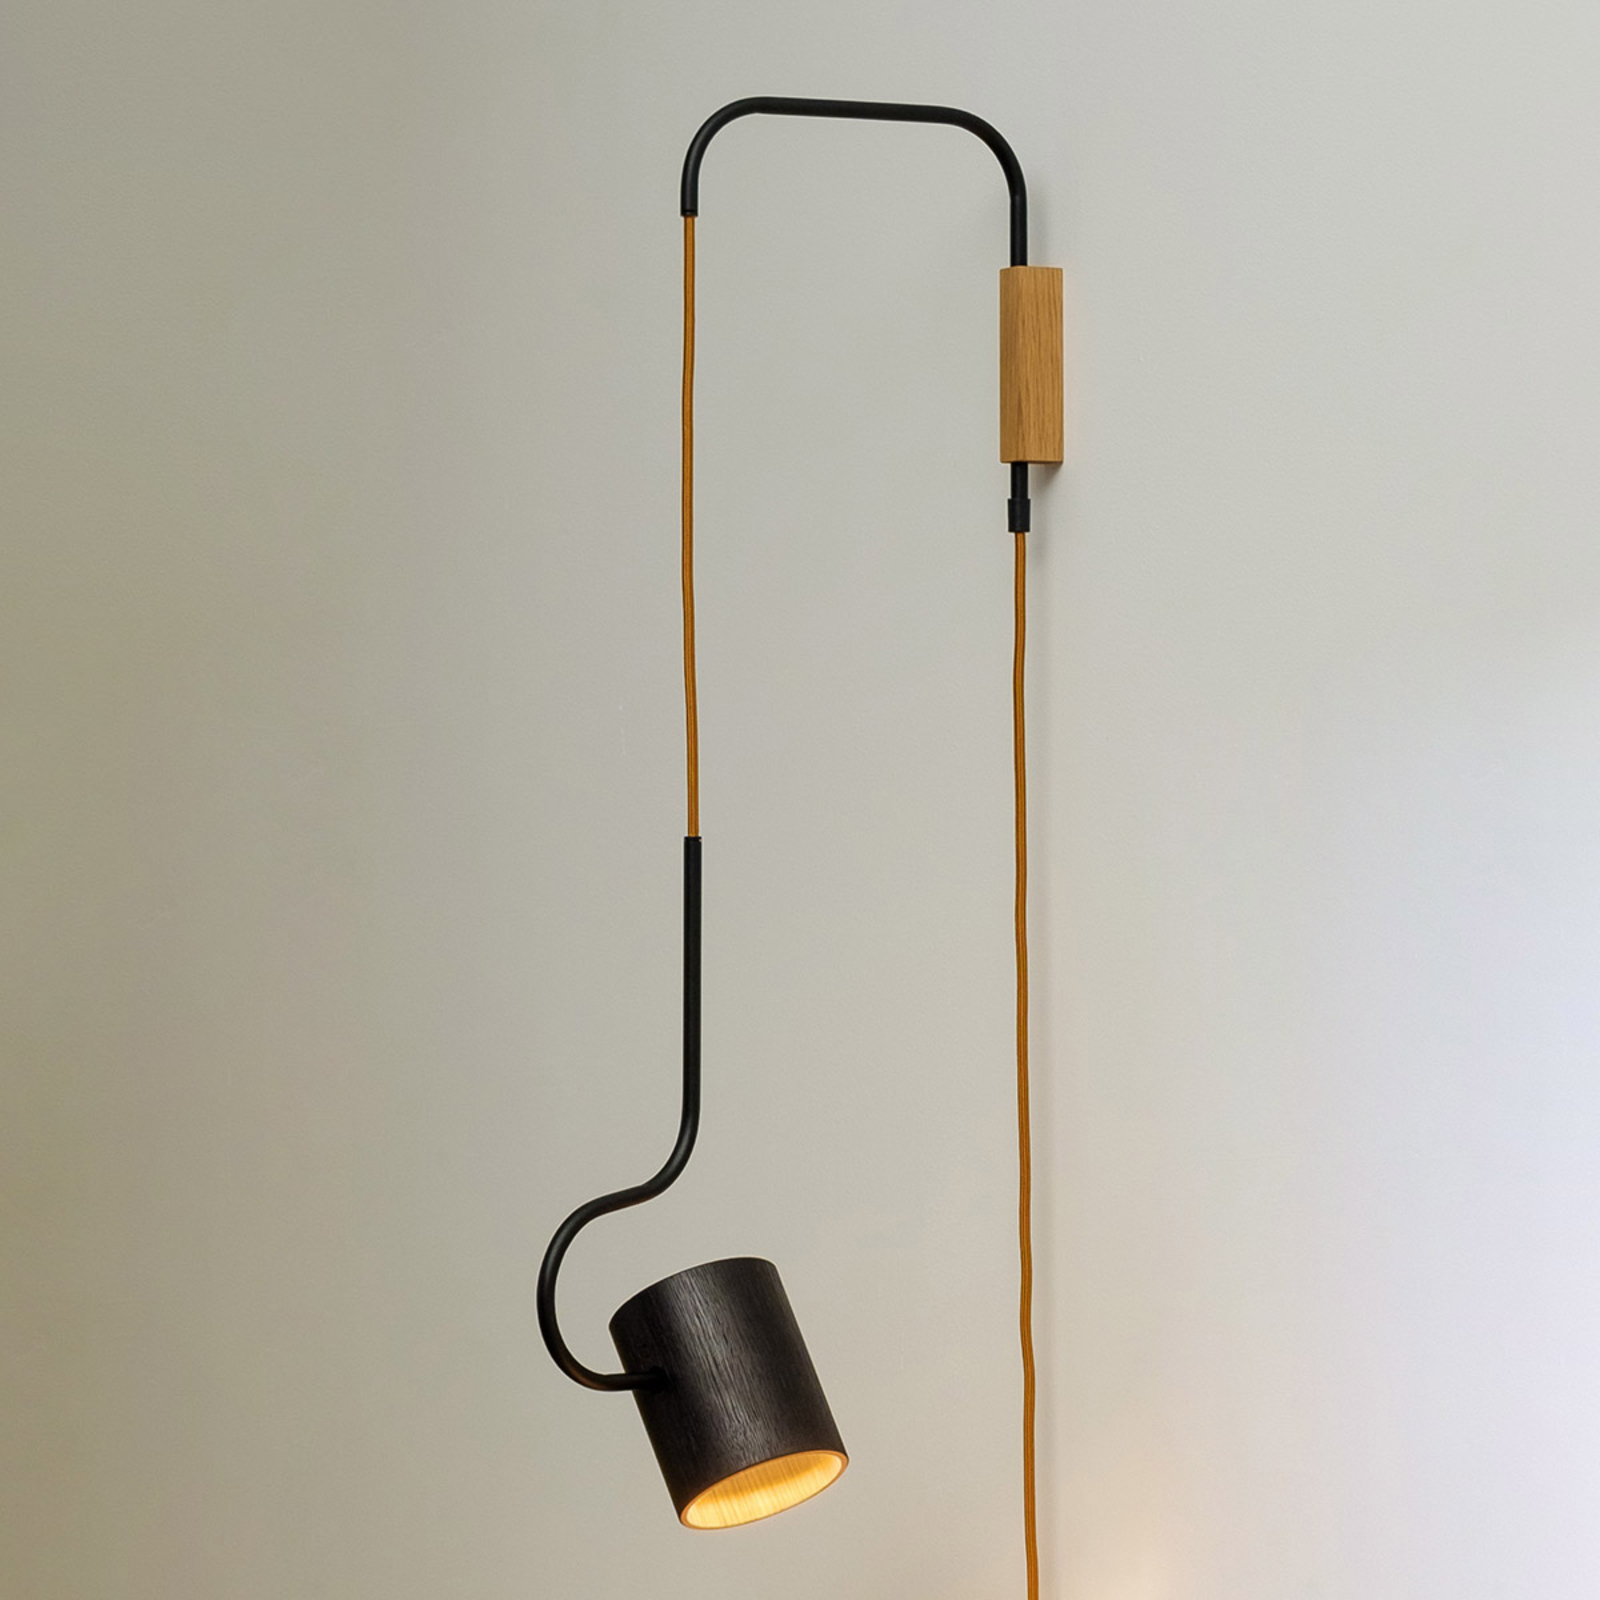 Bocal wall light with a hand dimmer and plug